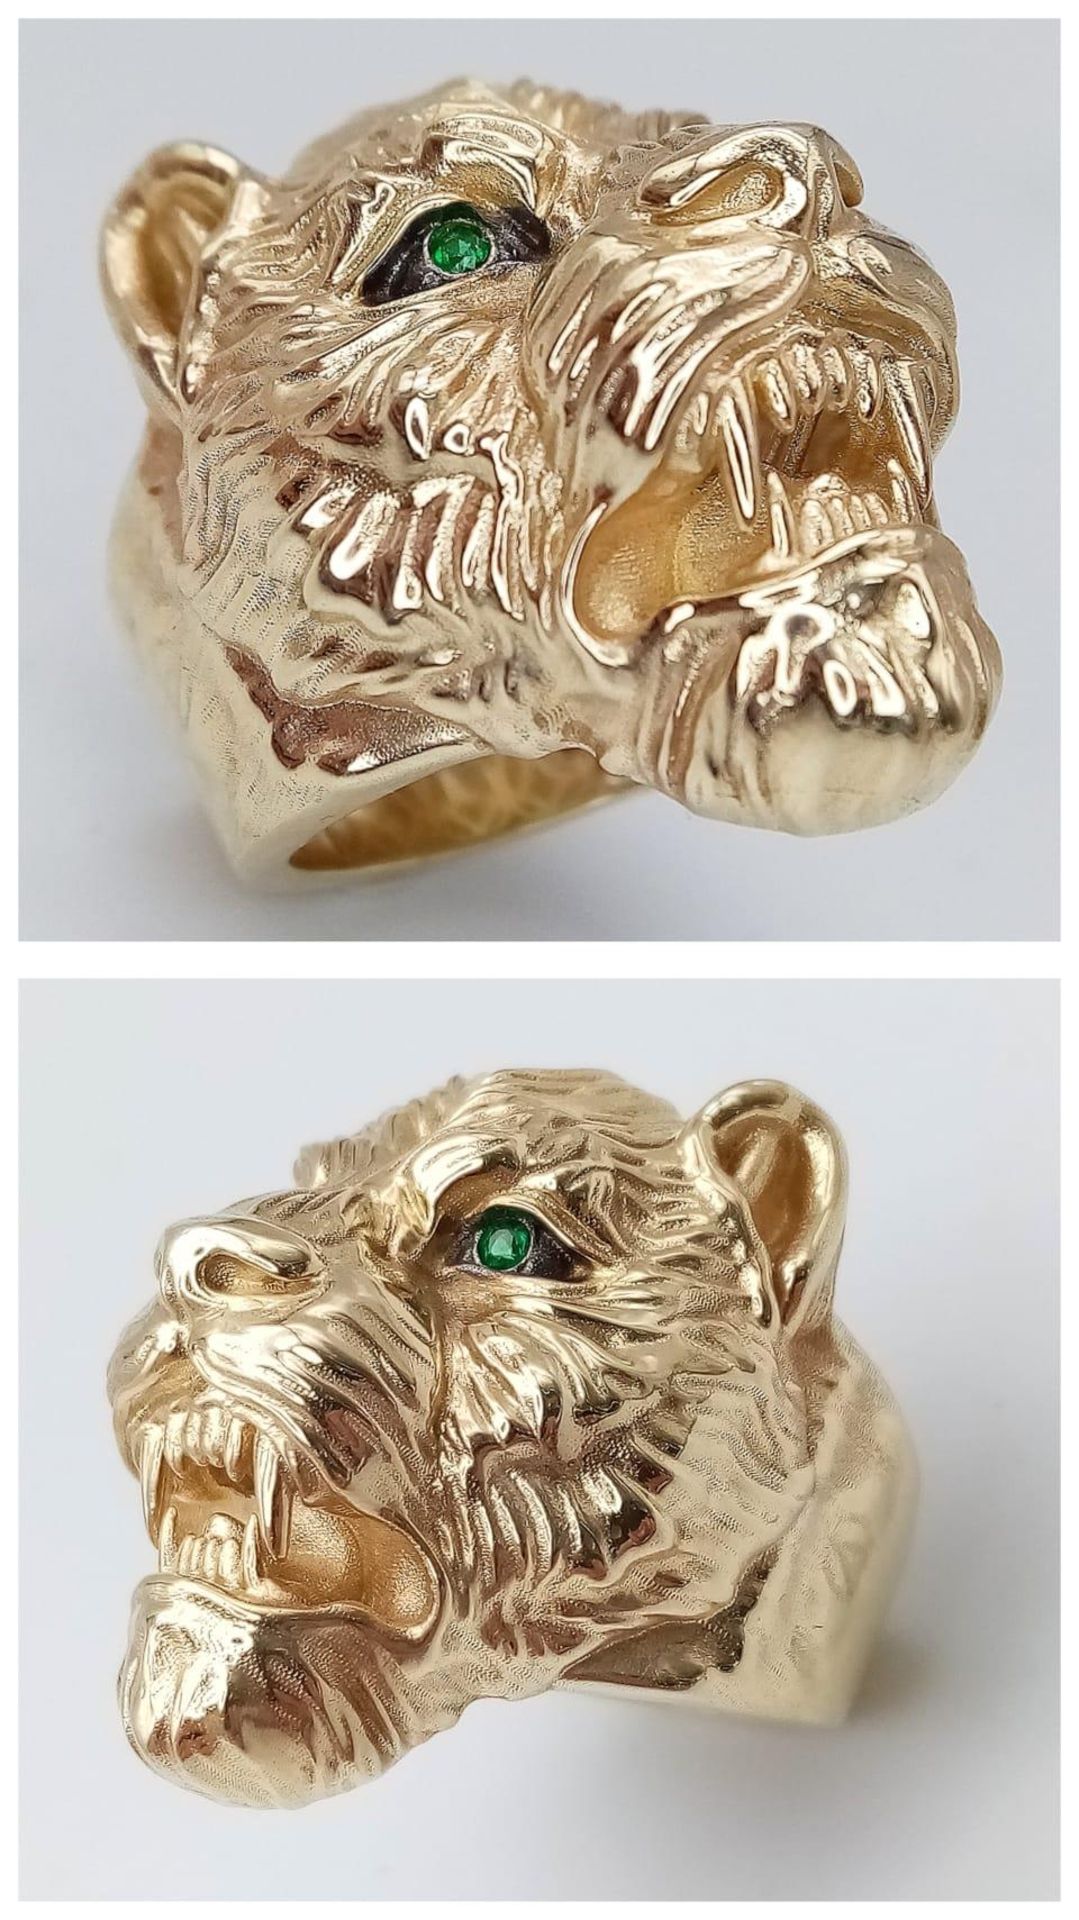 A 9K YELLOW GOLD TIGER / LEOPARD HEAD RING WITH GREEN STONES SET IN THE EYES. 10.8G. SIZE S - Bild 3 aus 5